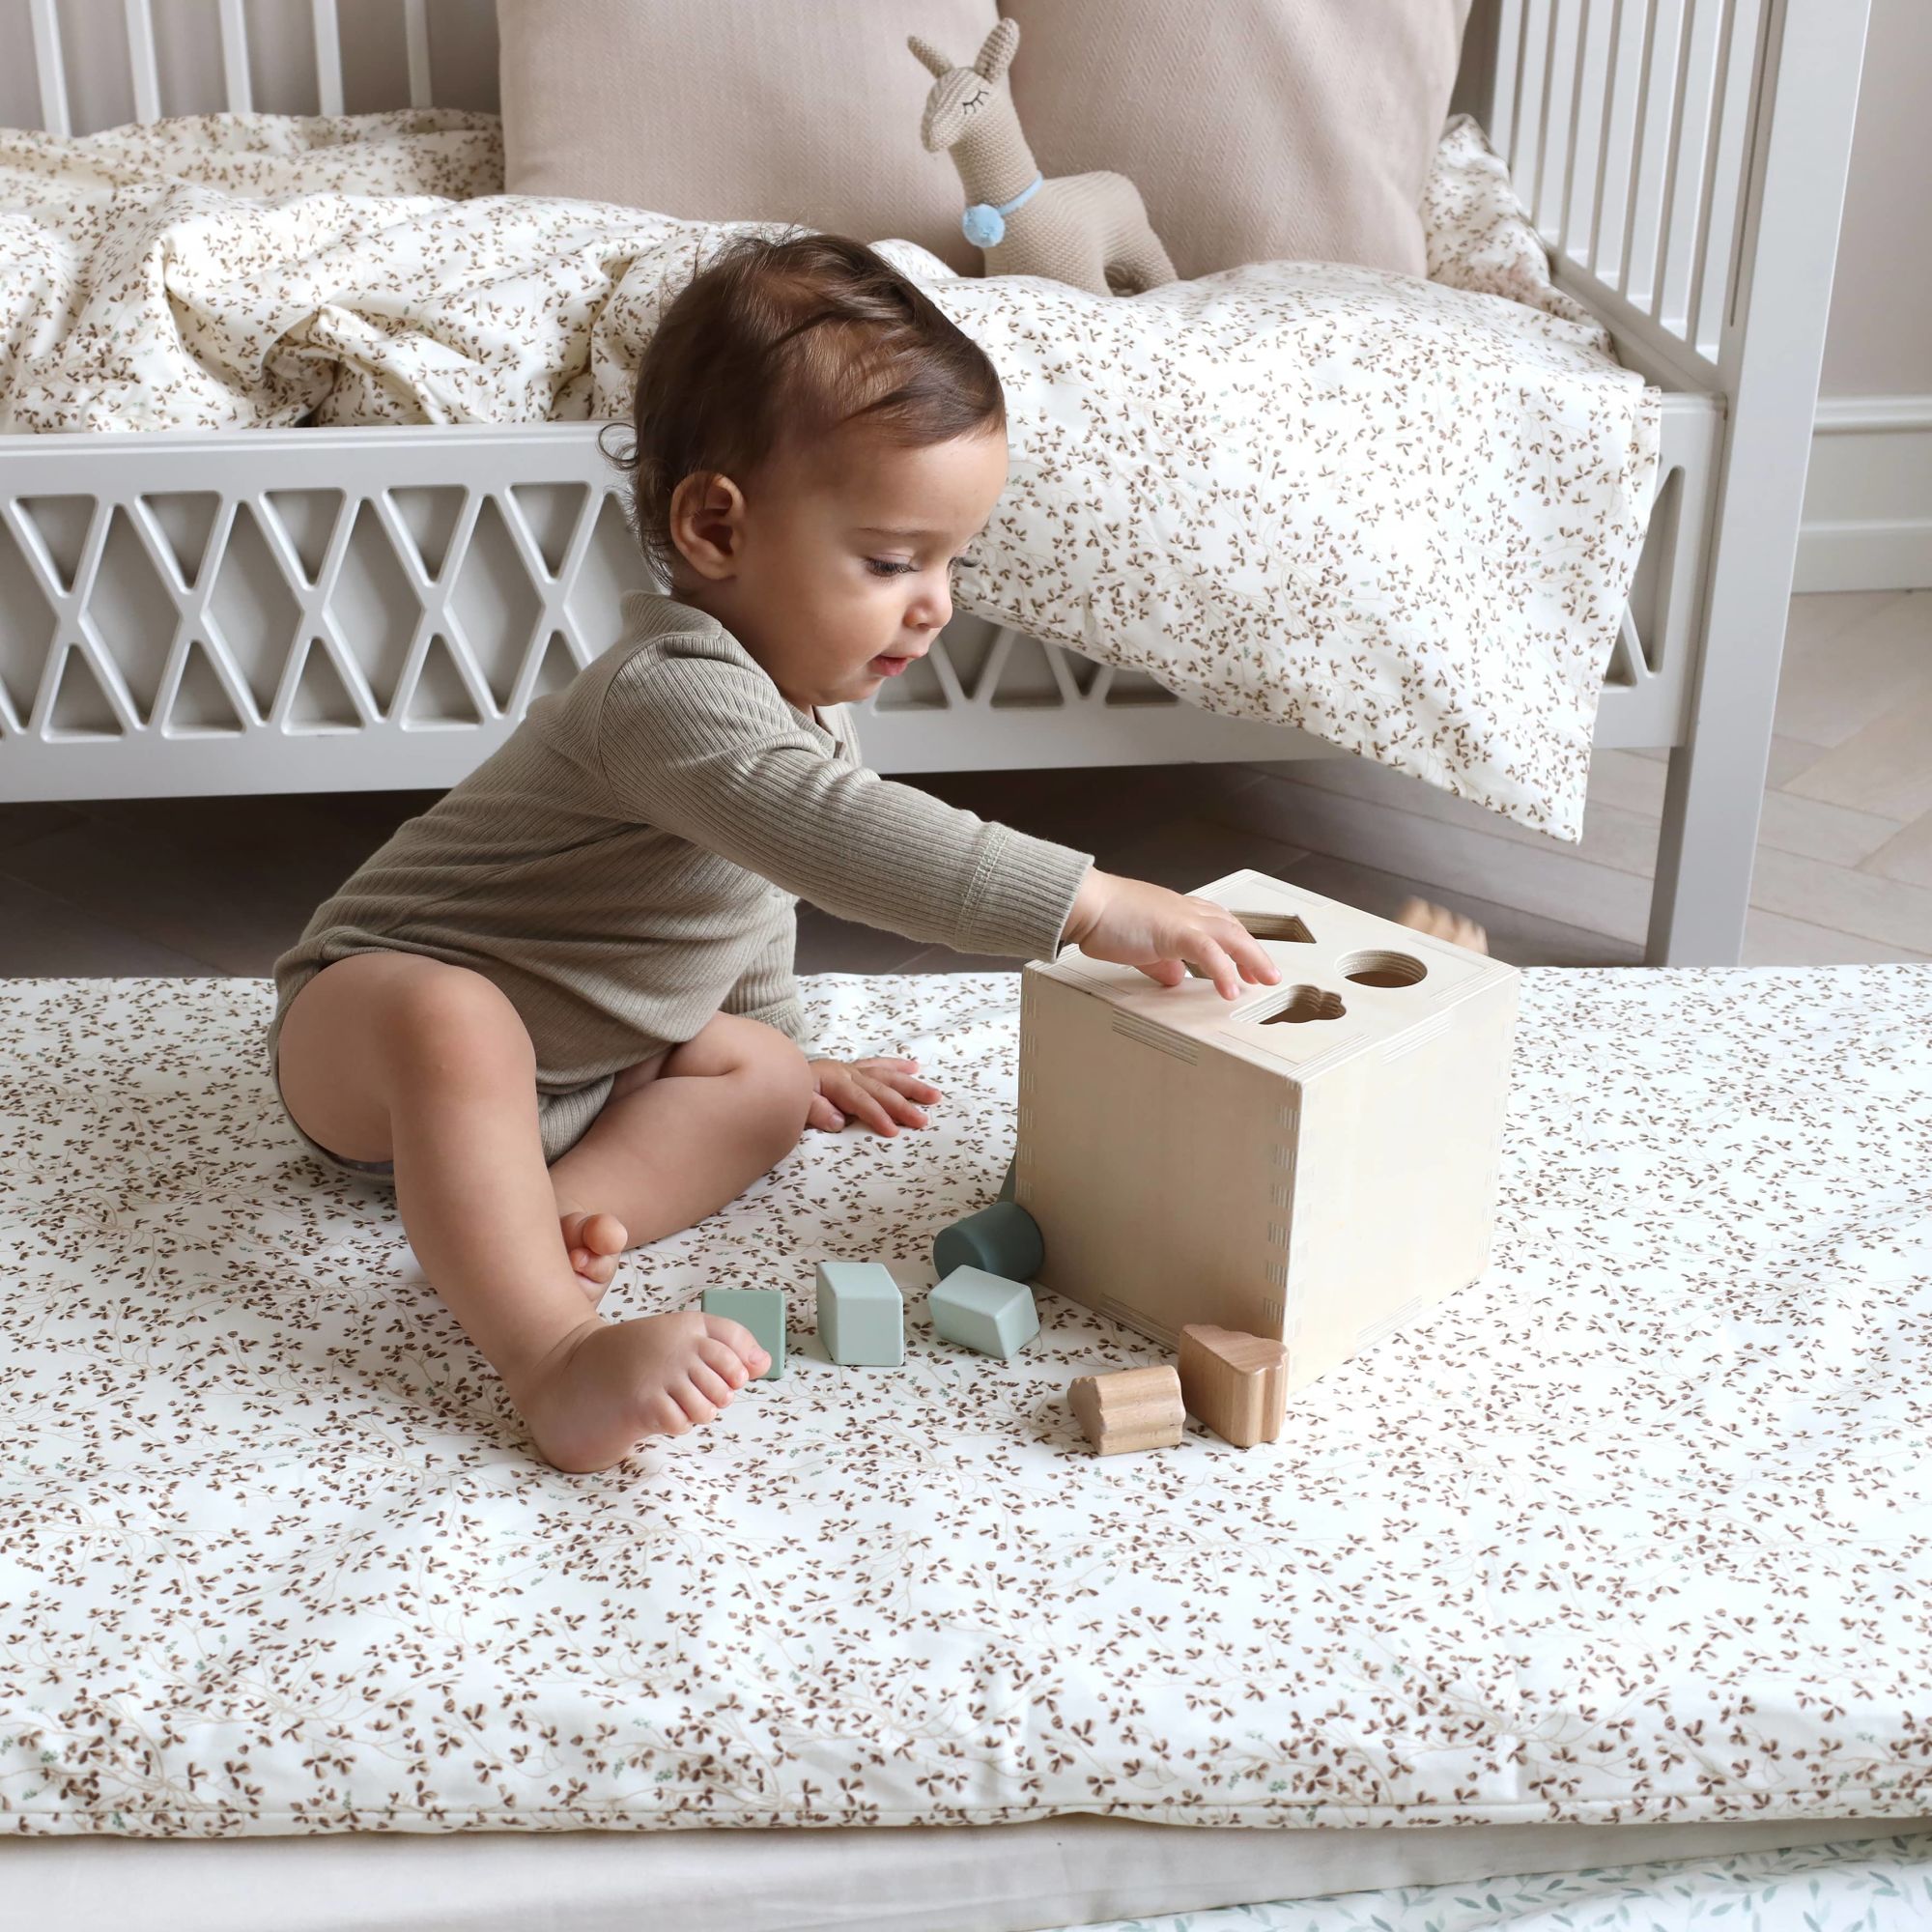 Baby sitting on a nice flower print duvet and playing with his wood toys 